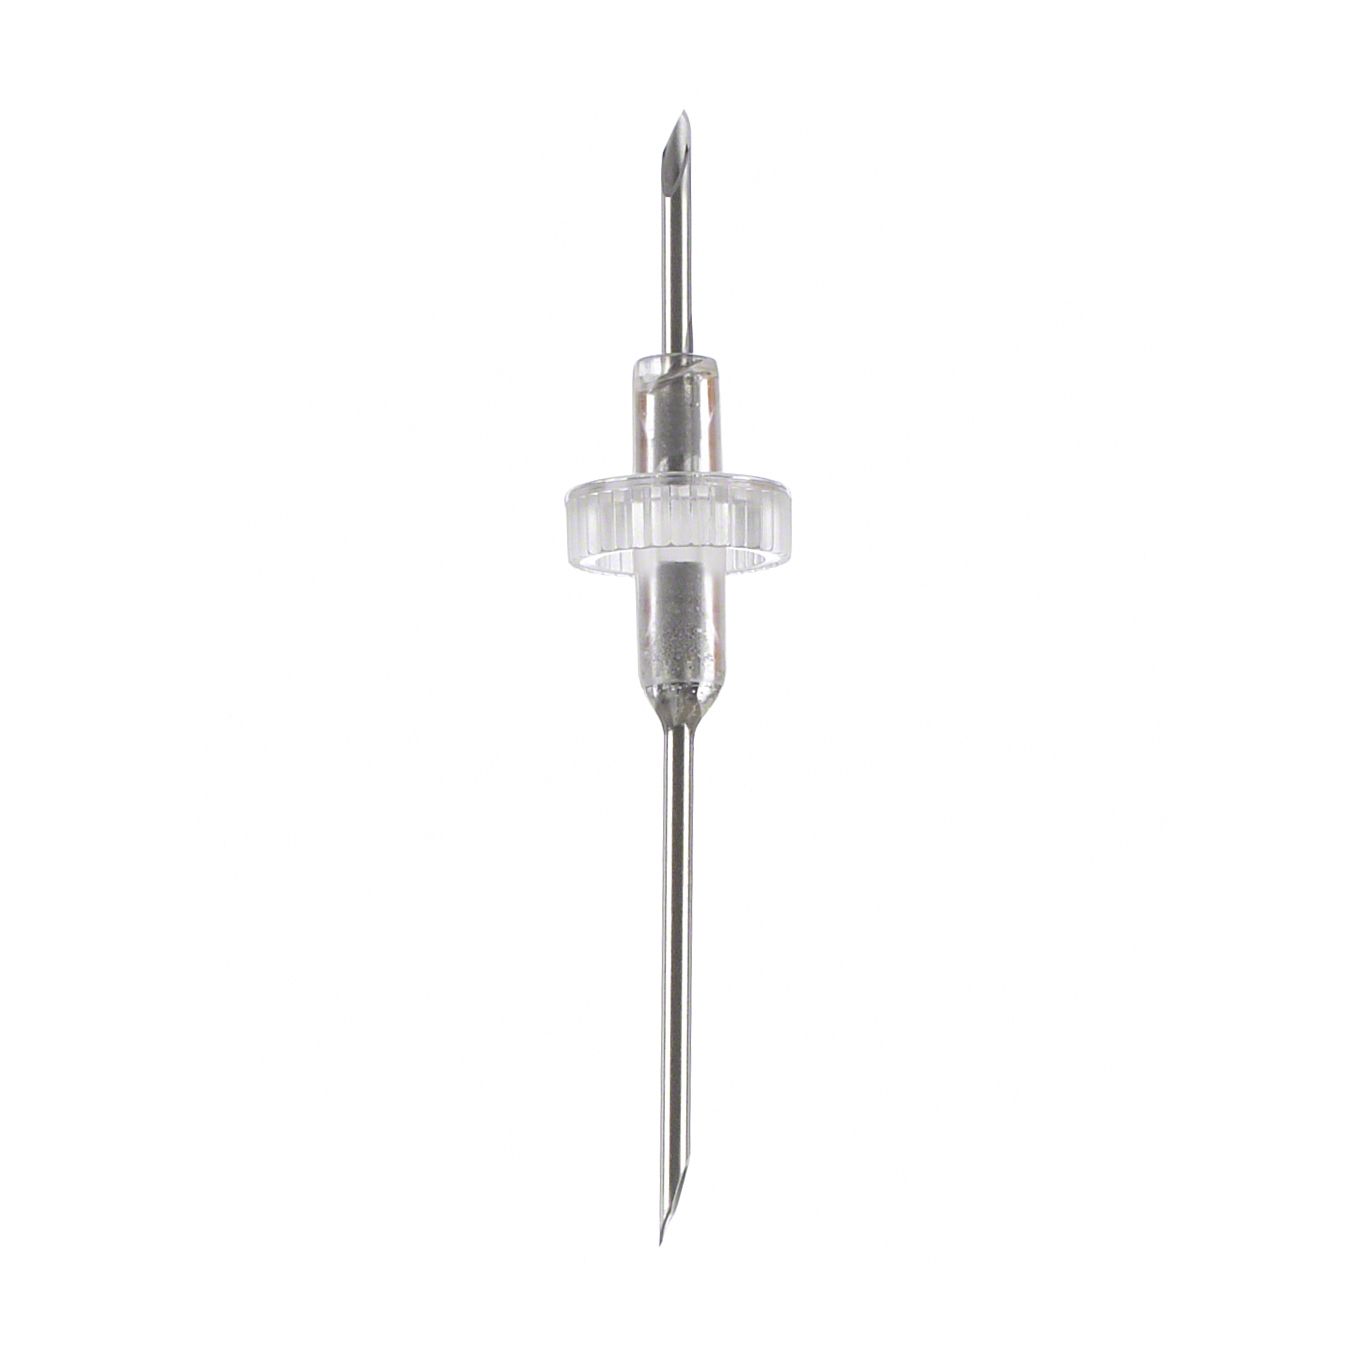 B. Braun Double-Ended Transfer Needle